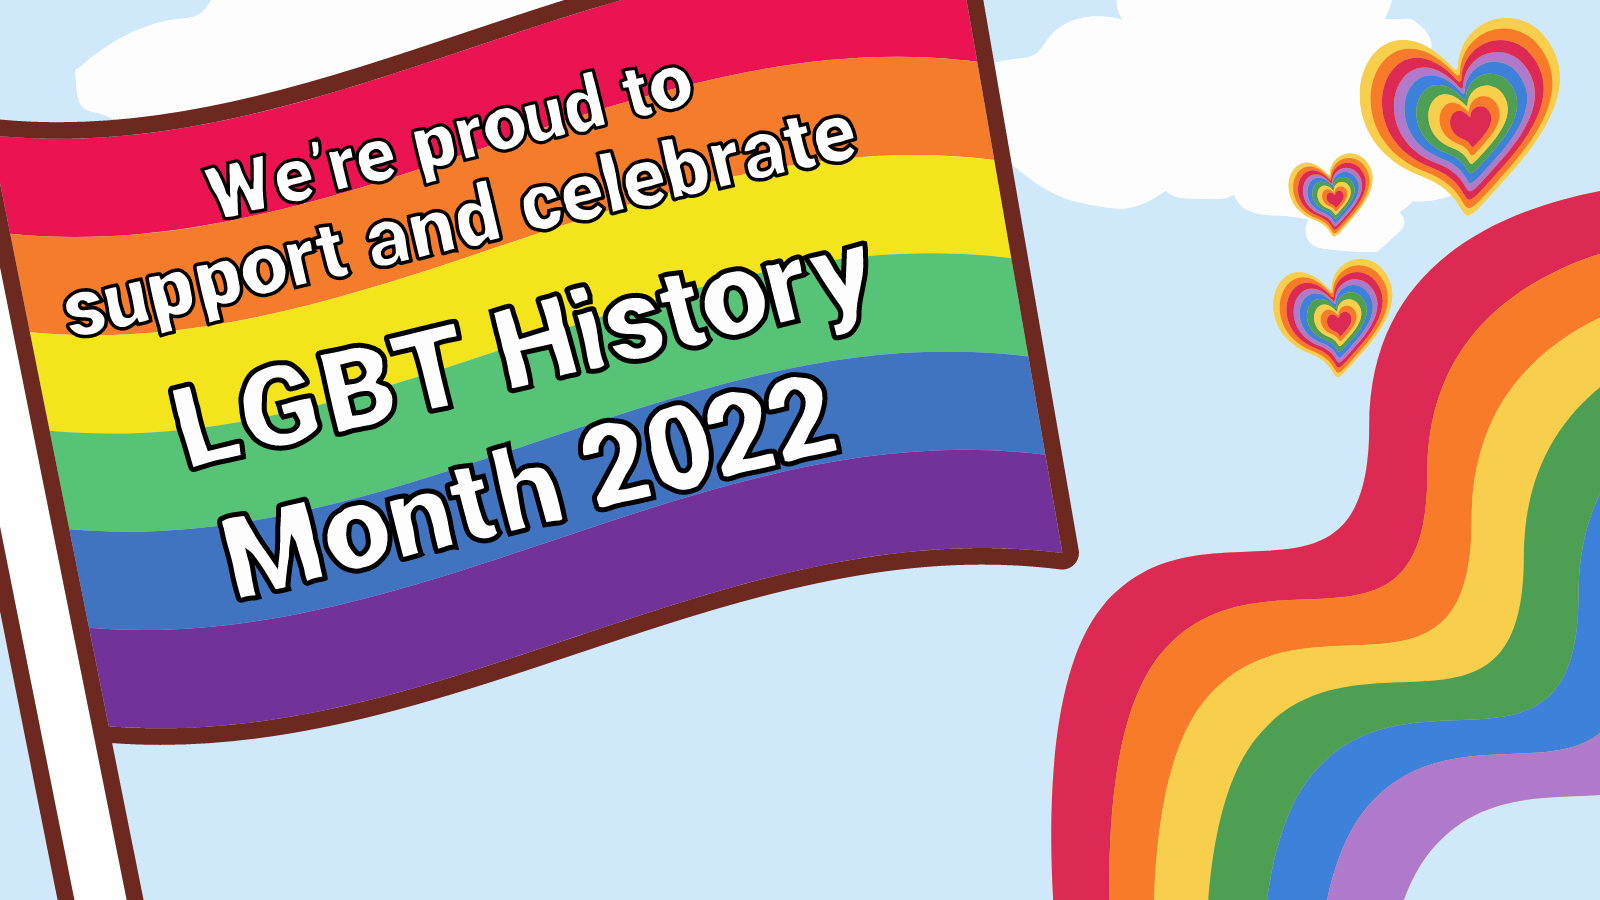 We're proud to support and celebrate LGBT History Month 2022